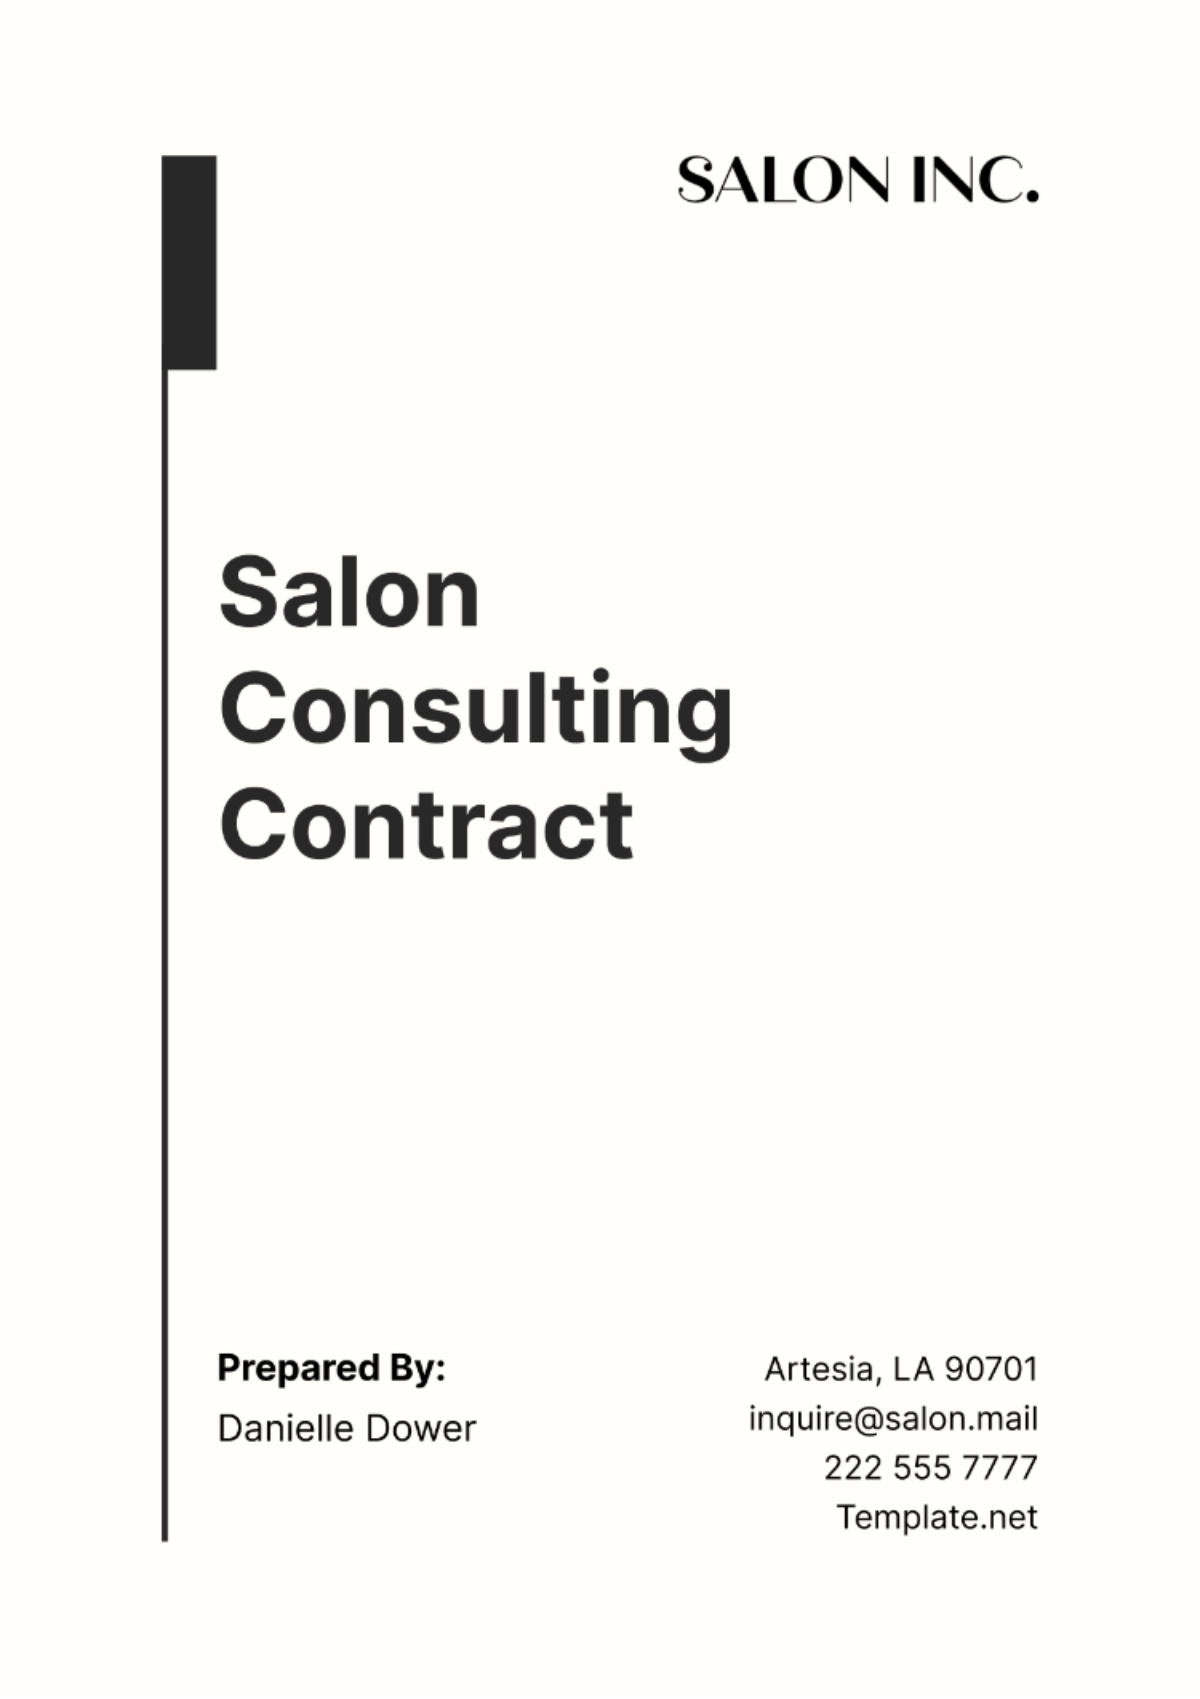 Salon Consulting Contract Template